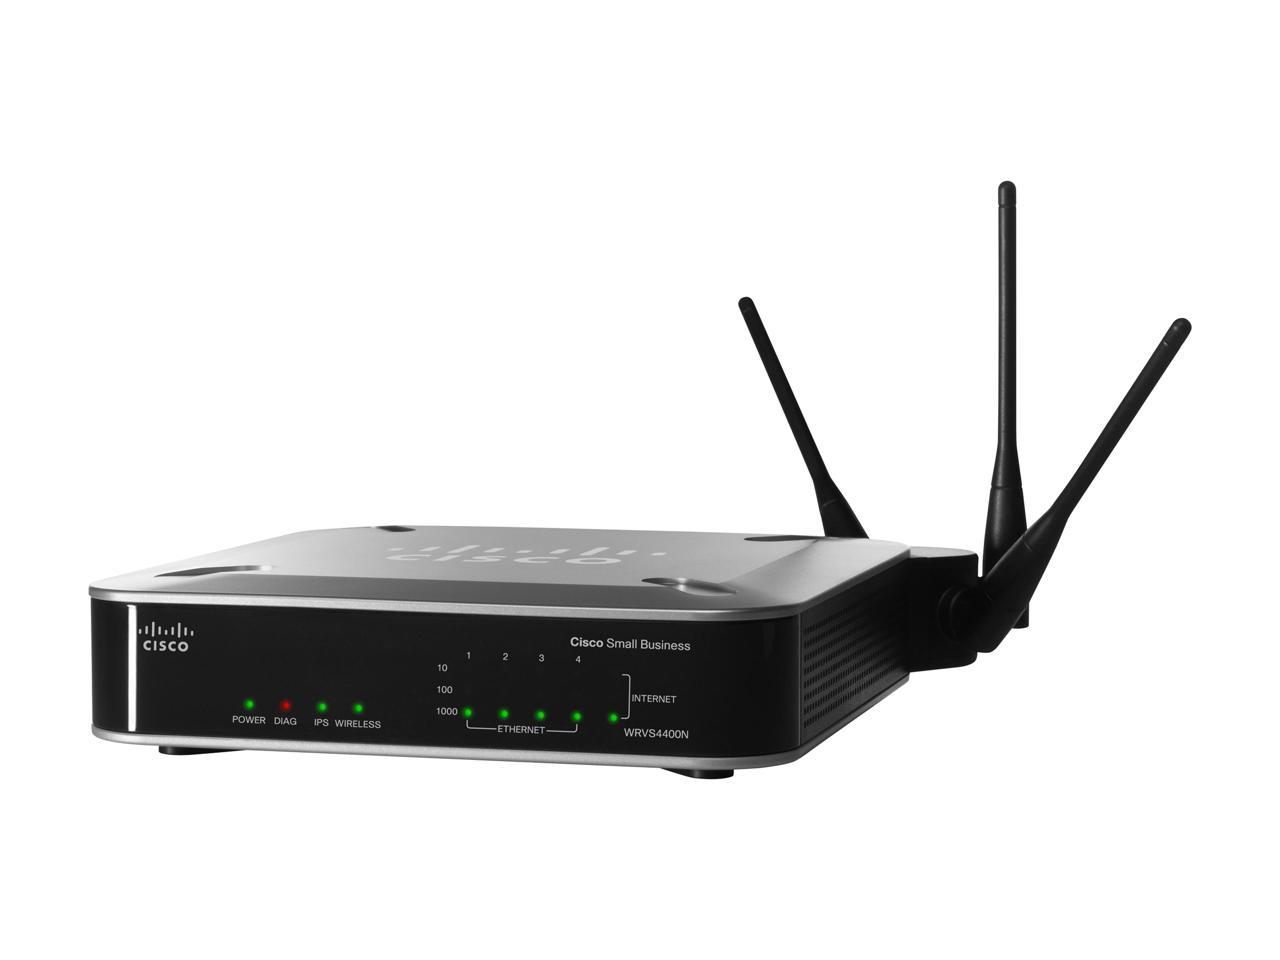 wrvs4400n wireless-n gigabit security router with vpn firmware upgrade